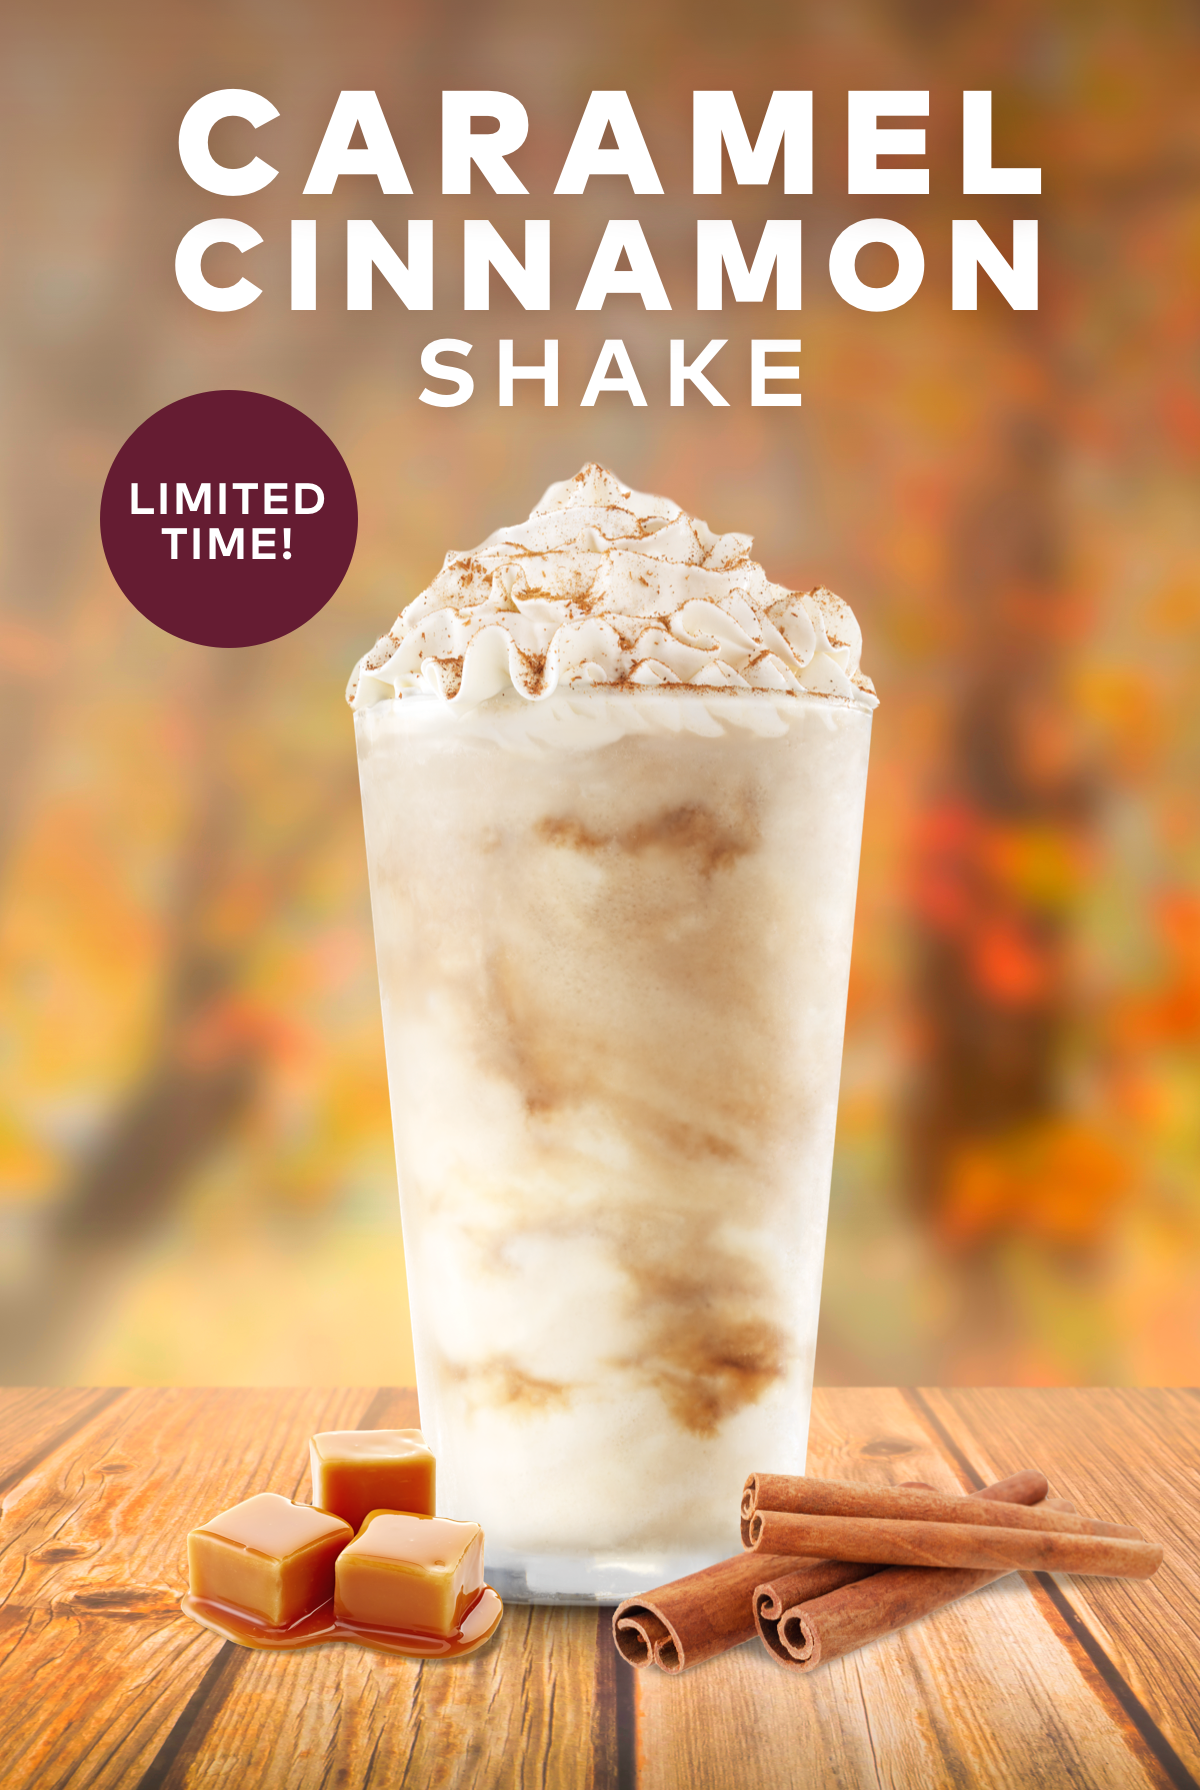 New Caramel Cinnamon Shake! For a limited time at participating U.S. locations.